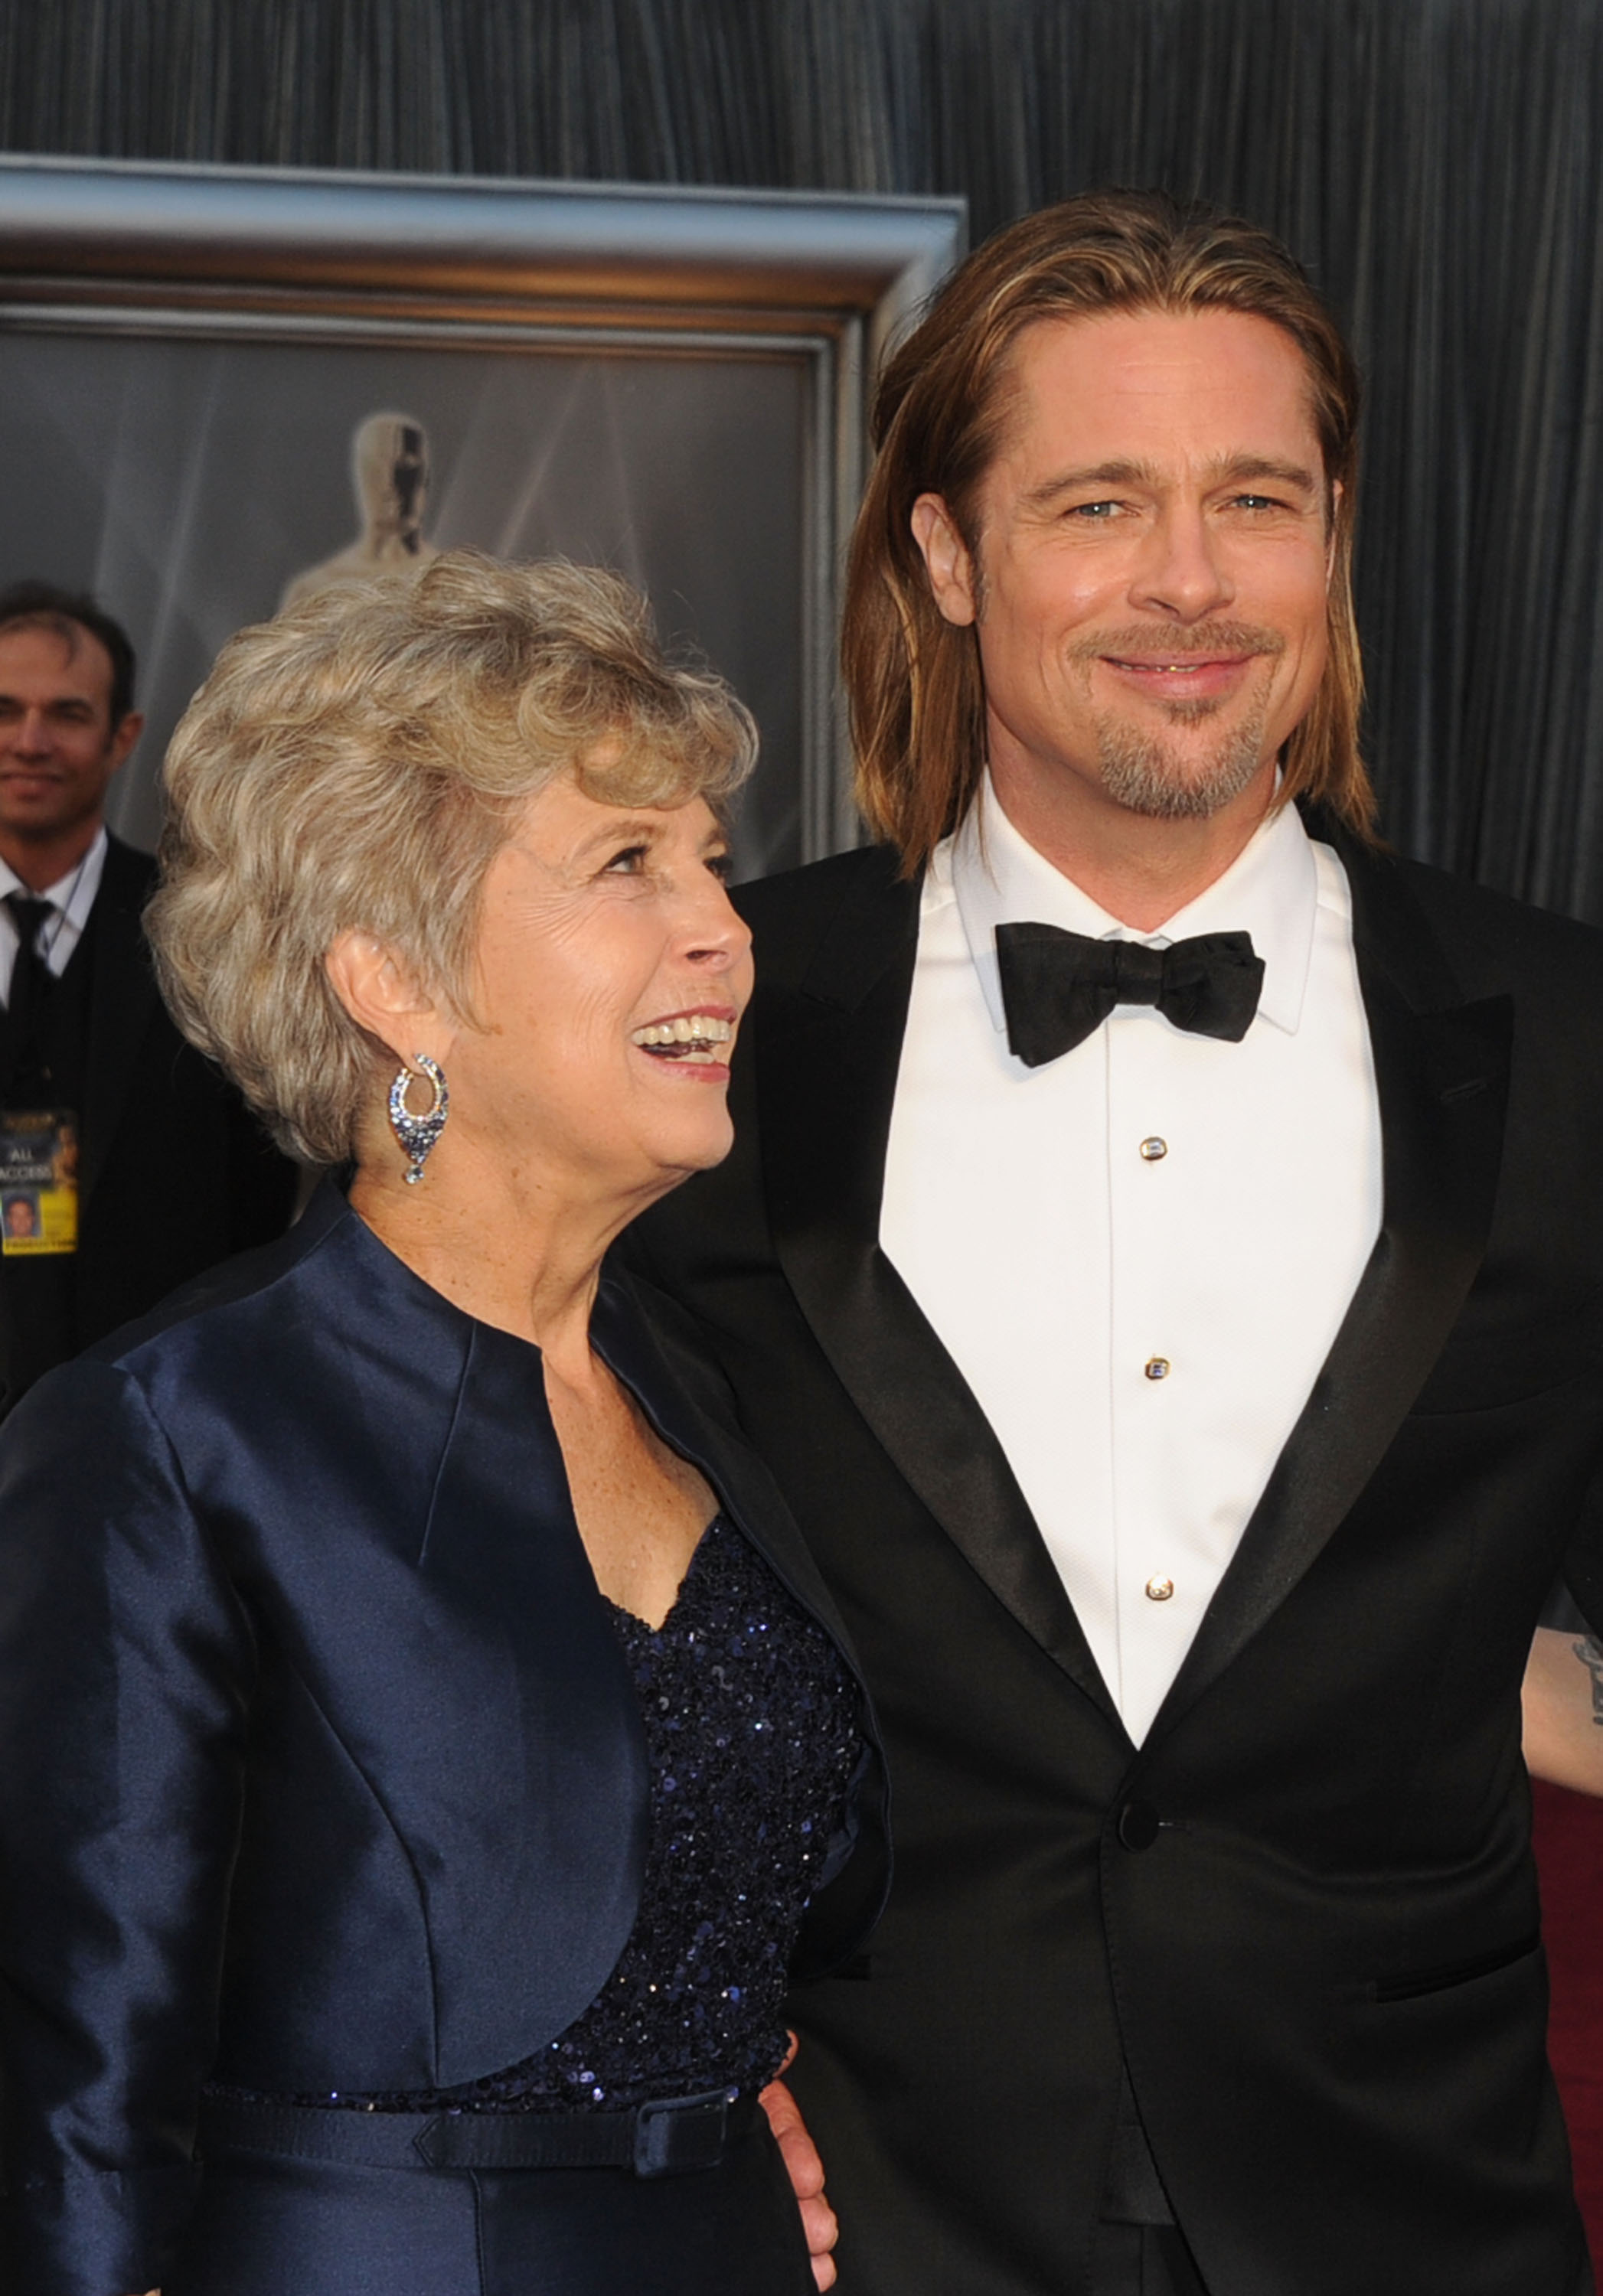 Brad Pitt and his mother Jane Pitt at the 84th Annual Academy Awards, Hollywood & Highland Center, February 26, 2012, Hollywood, California | Source: Getty Images